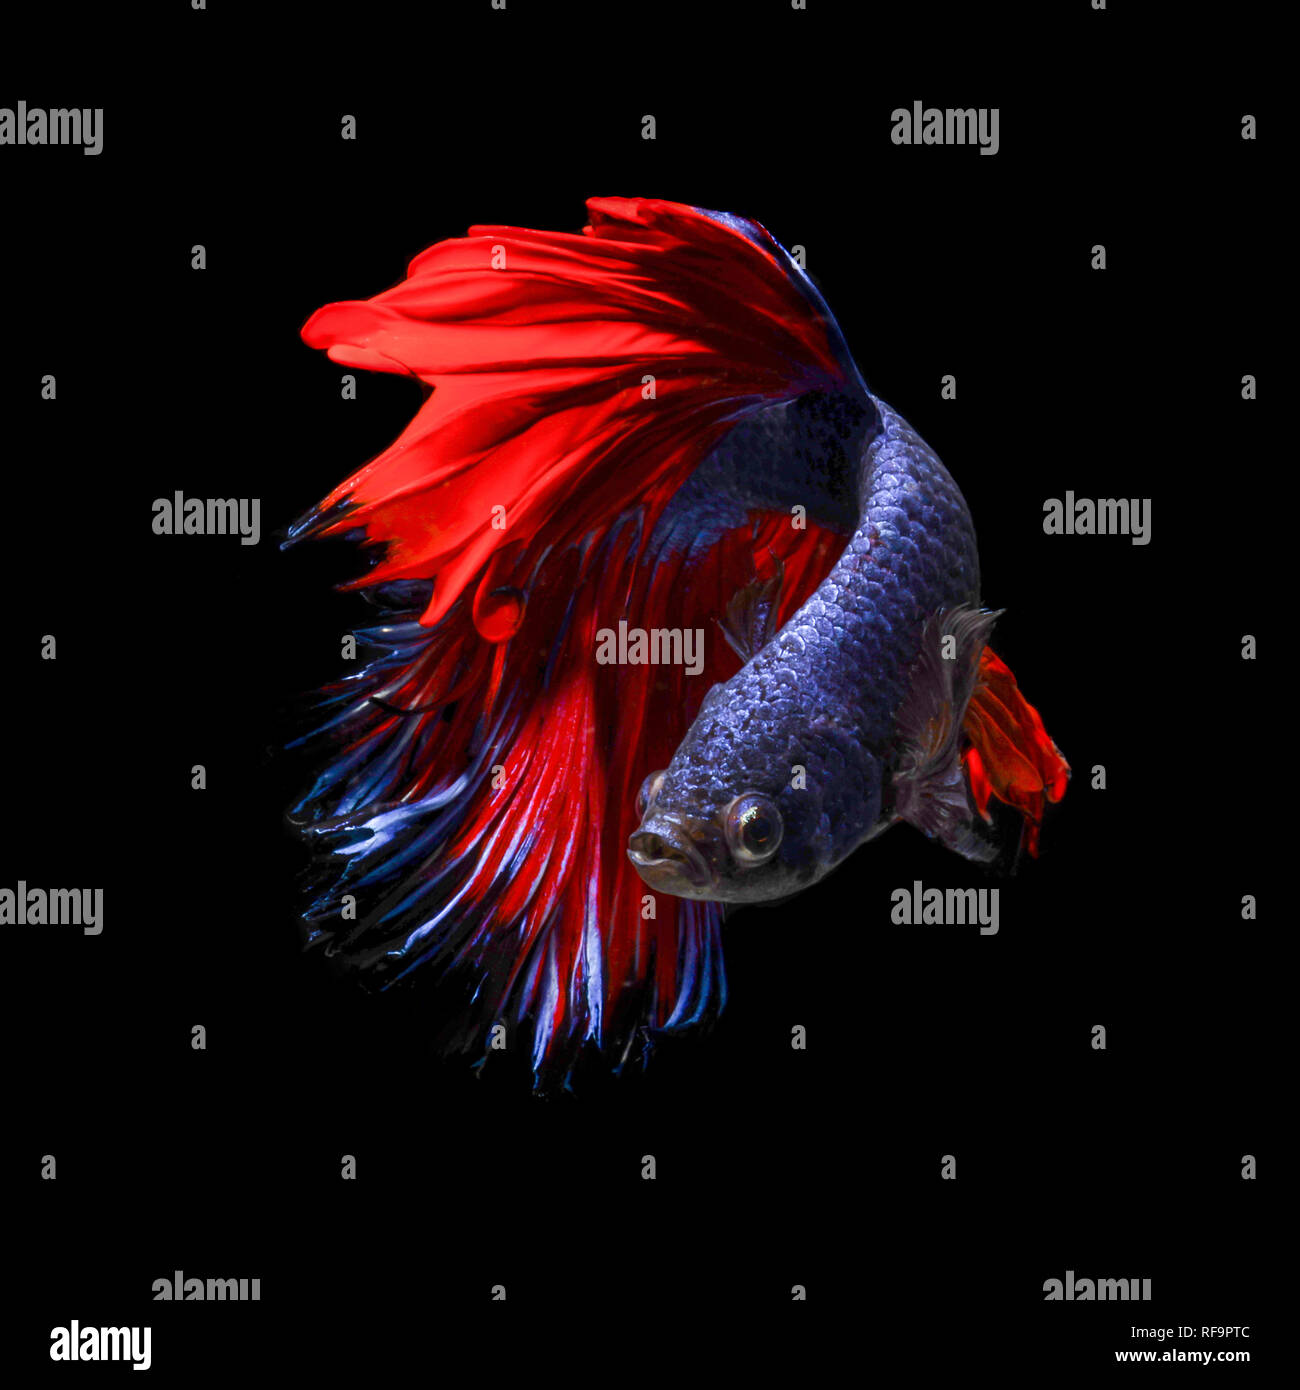 Siamese Fighting Fish also known as Betta is seen in an aquarium in Chicago, United States. Bettas are the most common species in the world-wide aquar Stock Photo